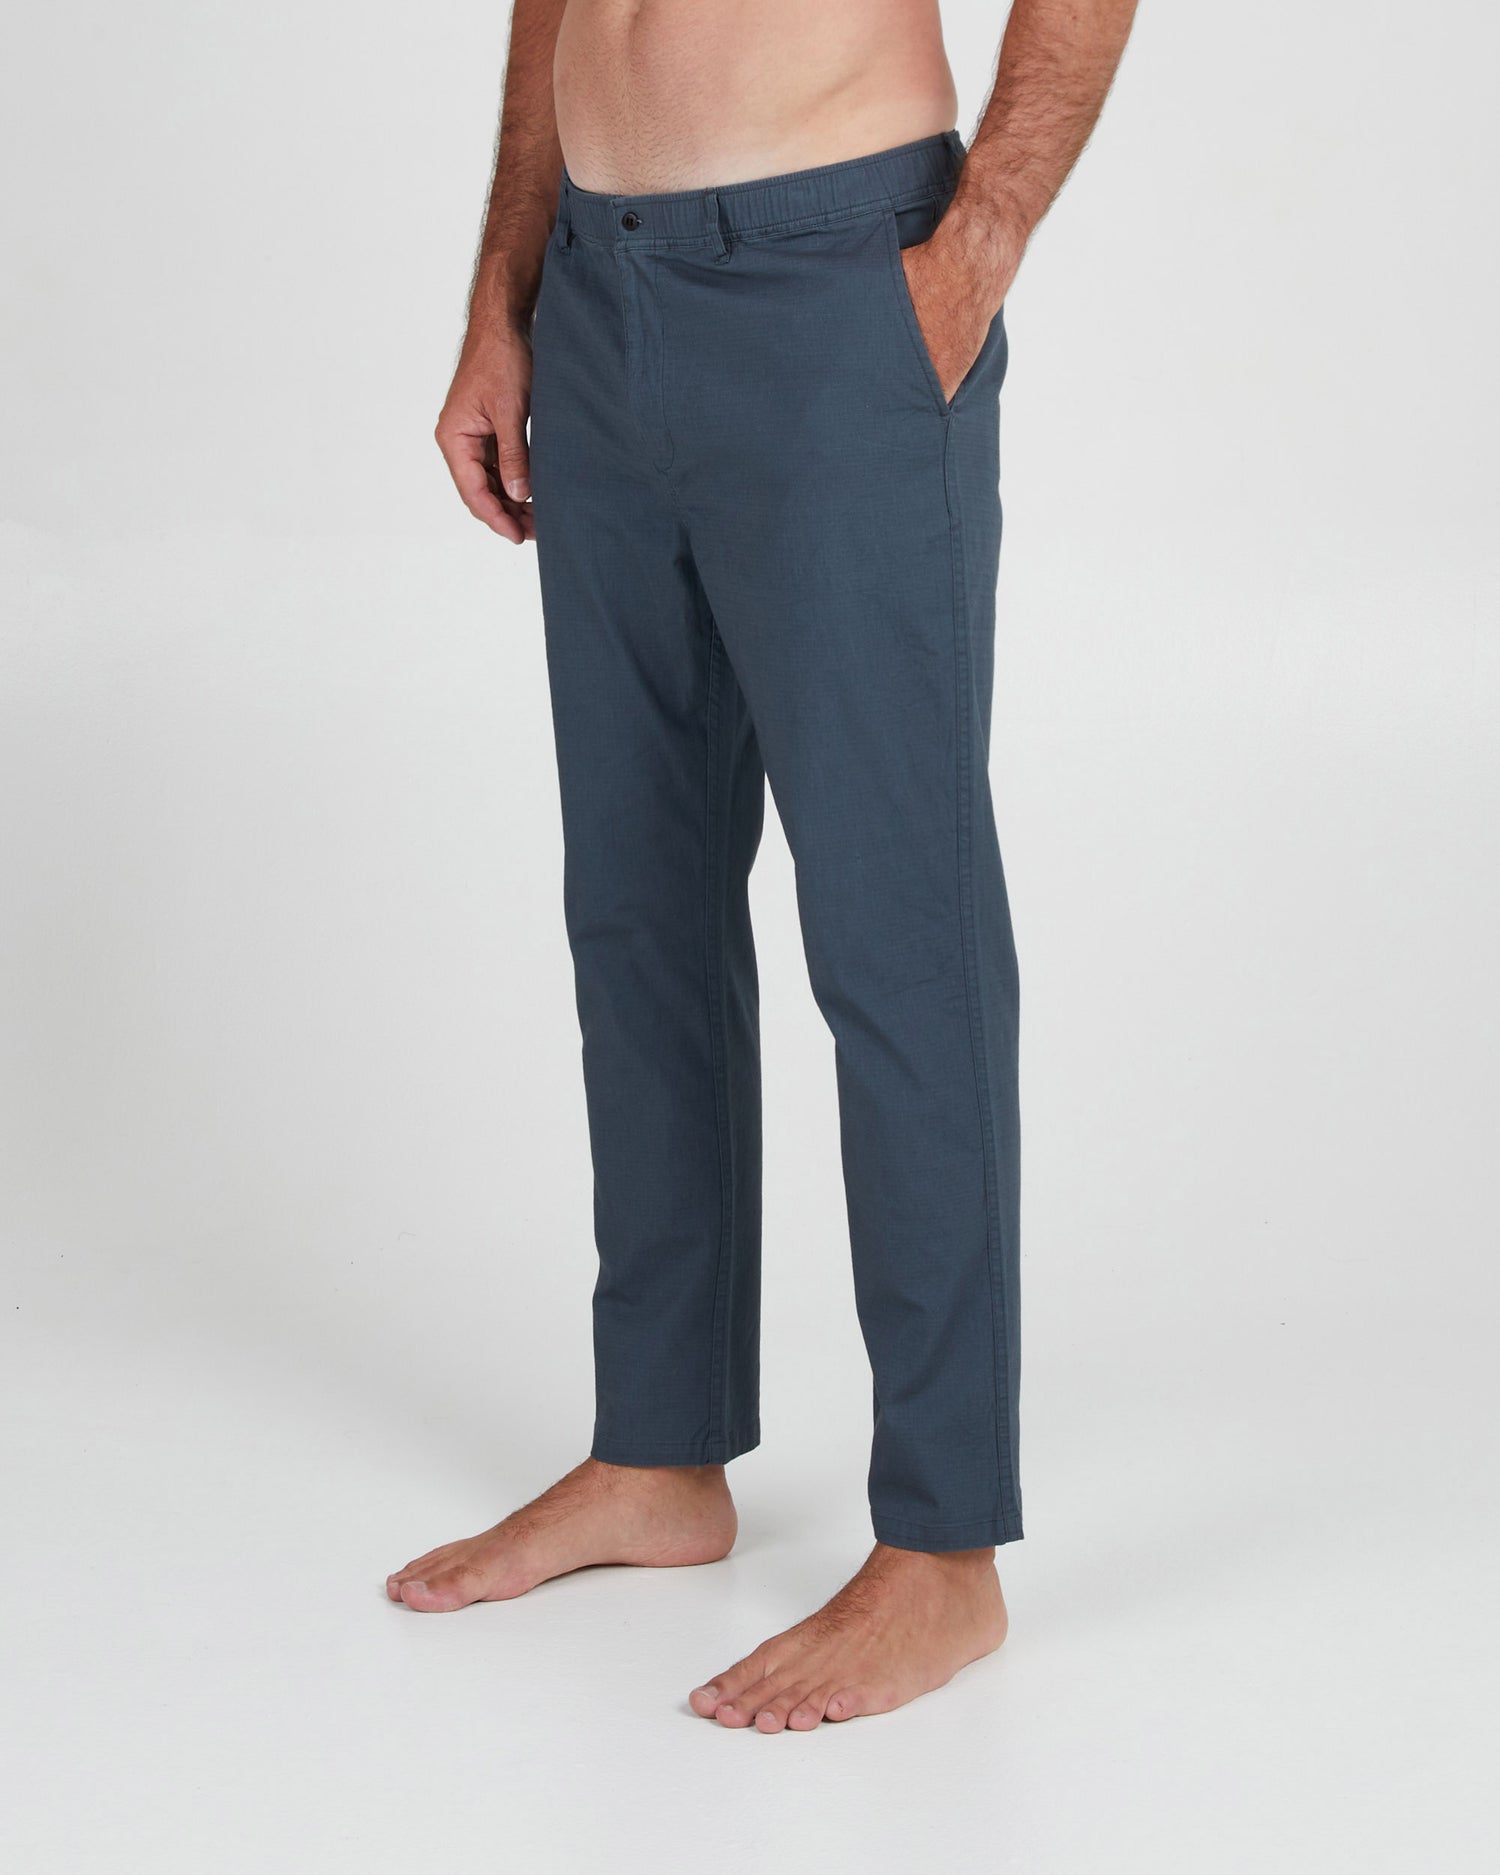 Backcountry Wasatch Ripstop Pant - Men's - Clothing